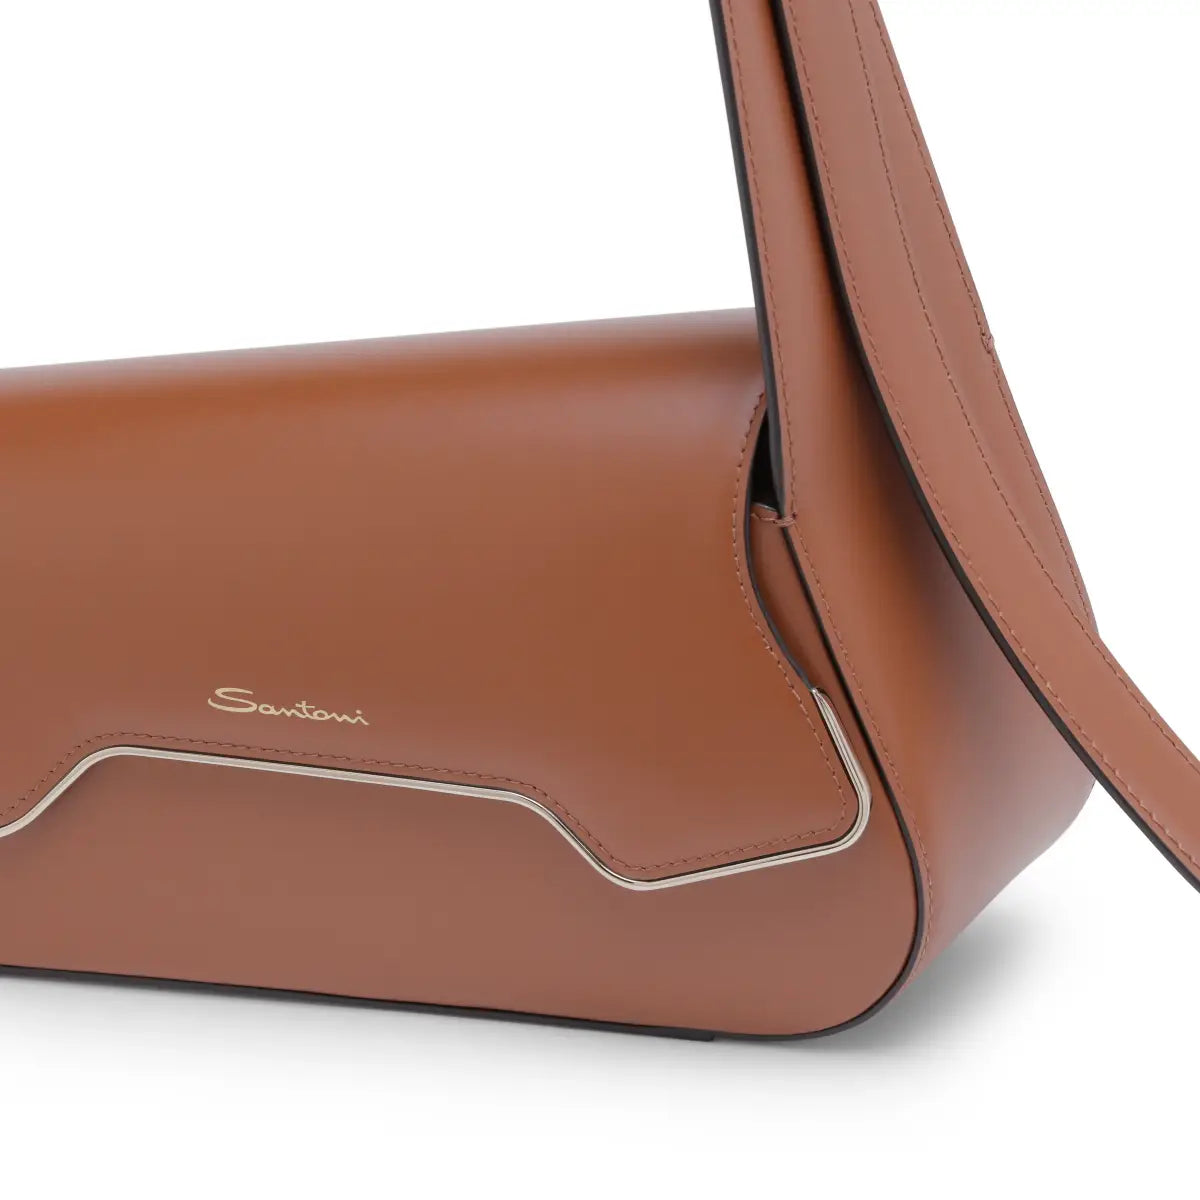 Camel Leather The Pluto Bag